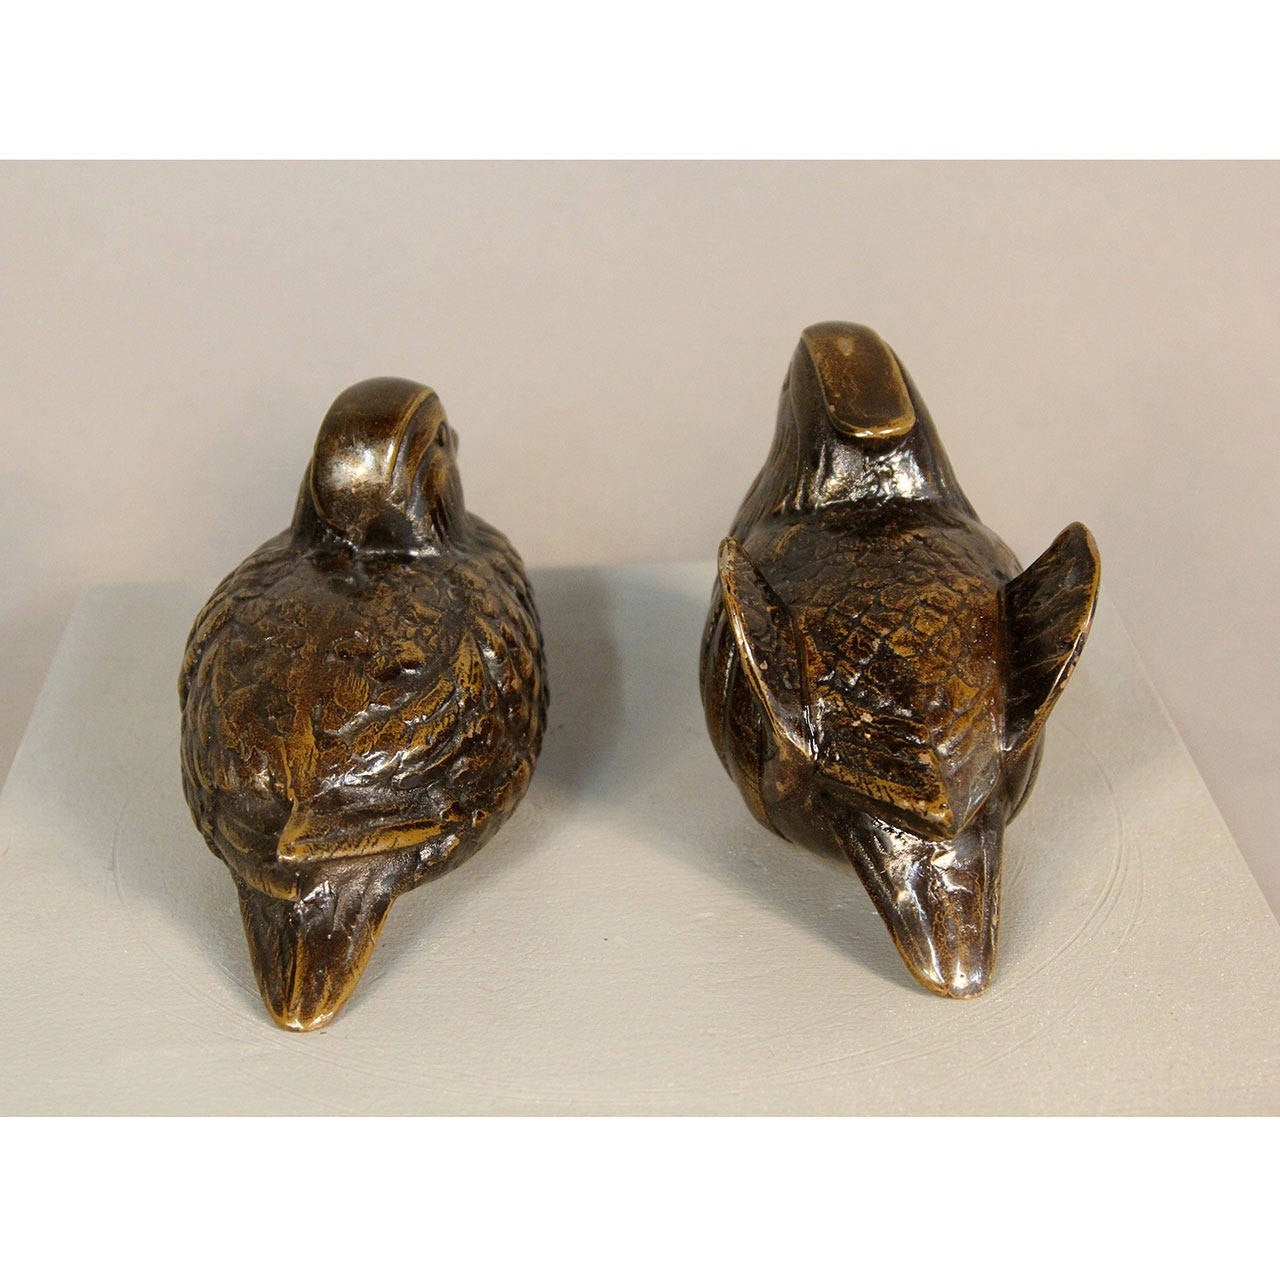 Unknown Pair of Mandarin Duck Bookends or Sculptures